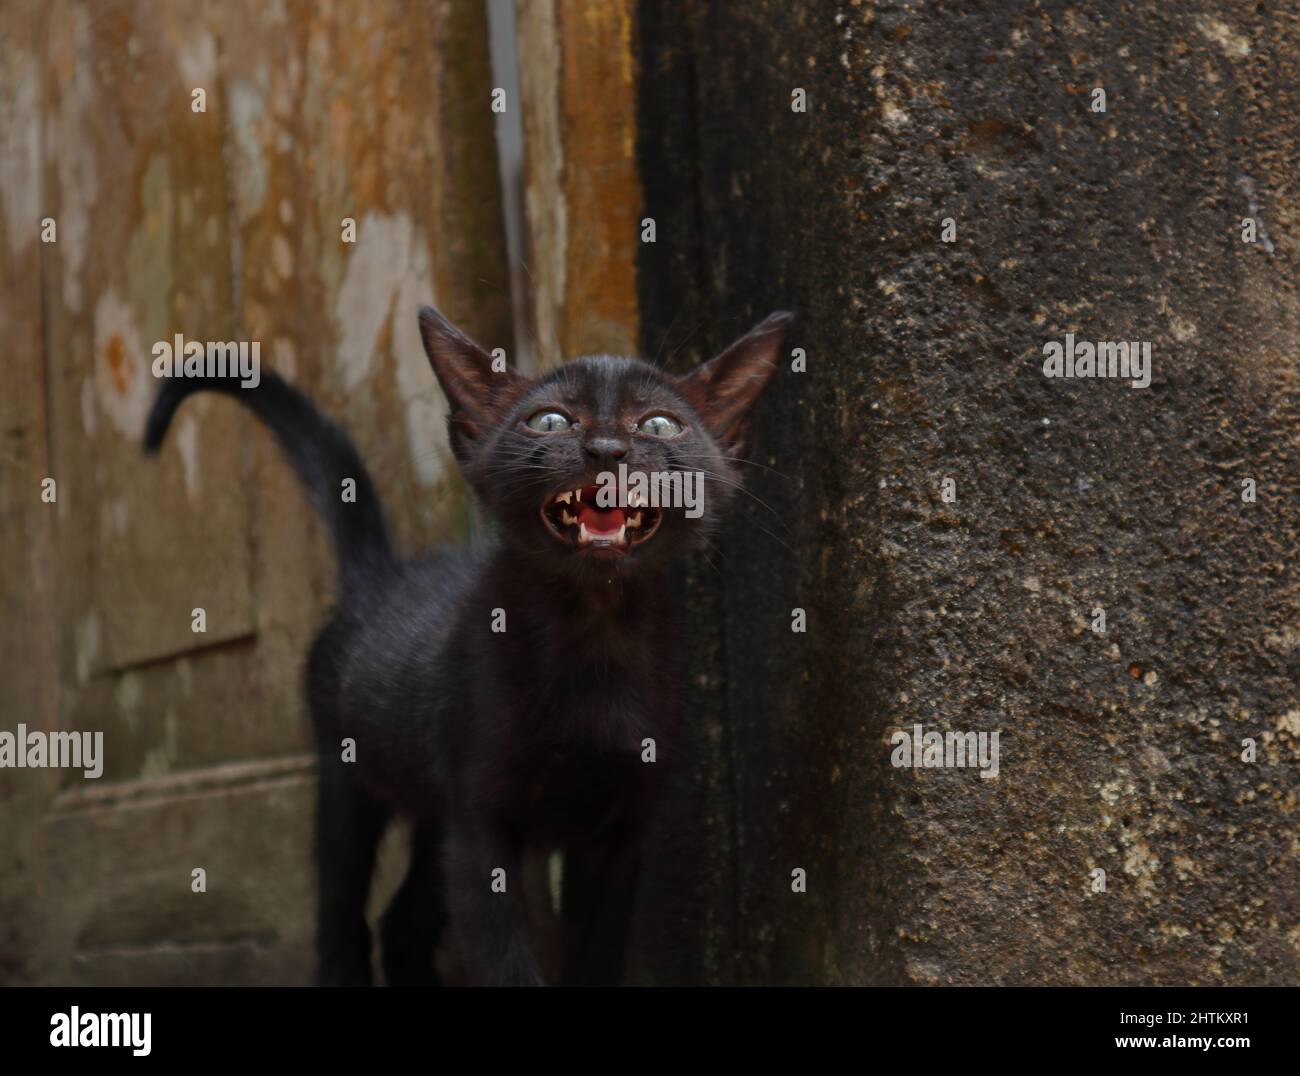 Below view of a black Kitten's face with mouth parts including tongue, kitten walking towards the camera while crying big meow Stock Photo